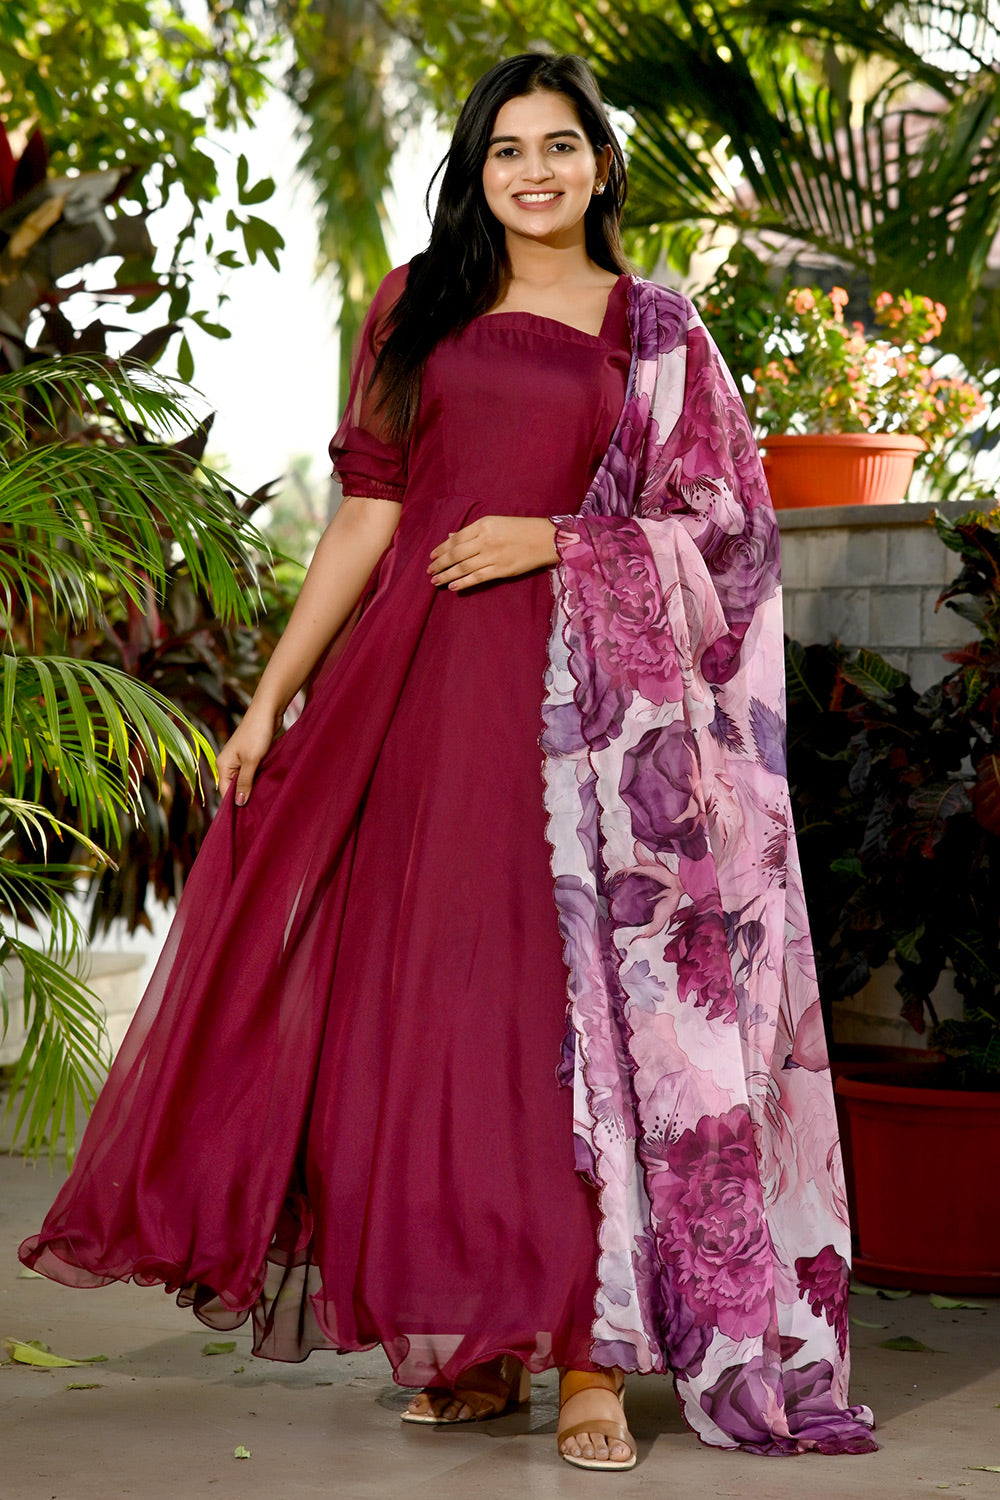 Wine Tebby Silk Rich Printed Gown With Flower Printed Dupatta